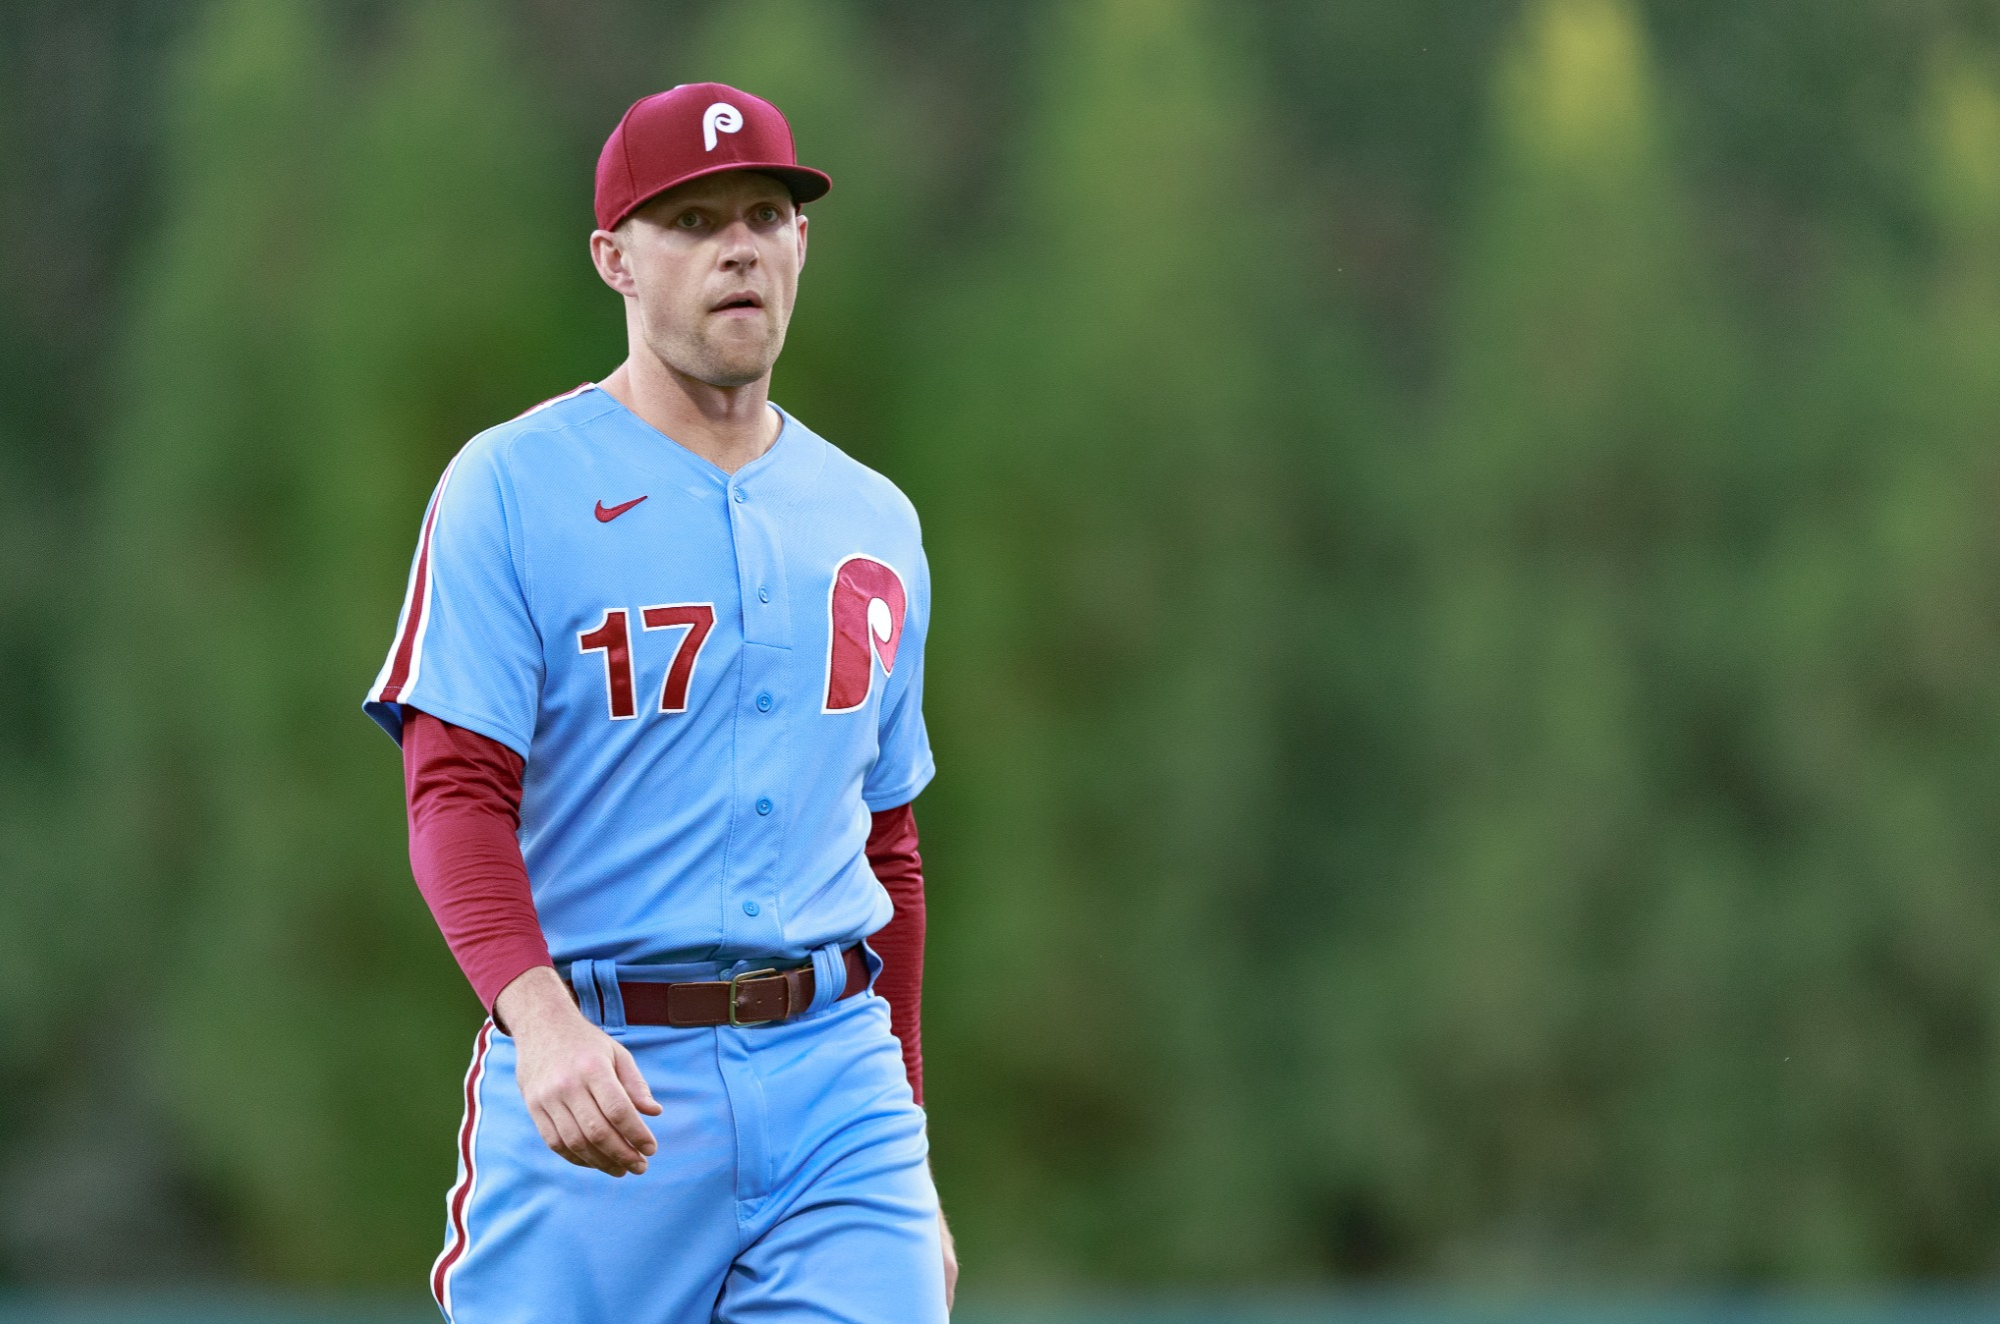 2022 World Series: Rhys Hoskins, Phillies appreciative of the ride